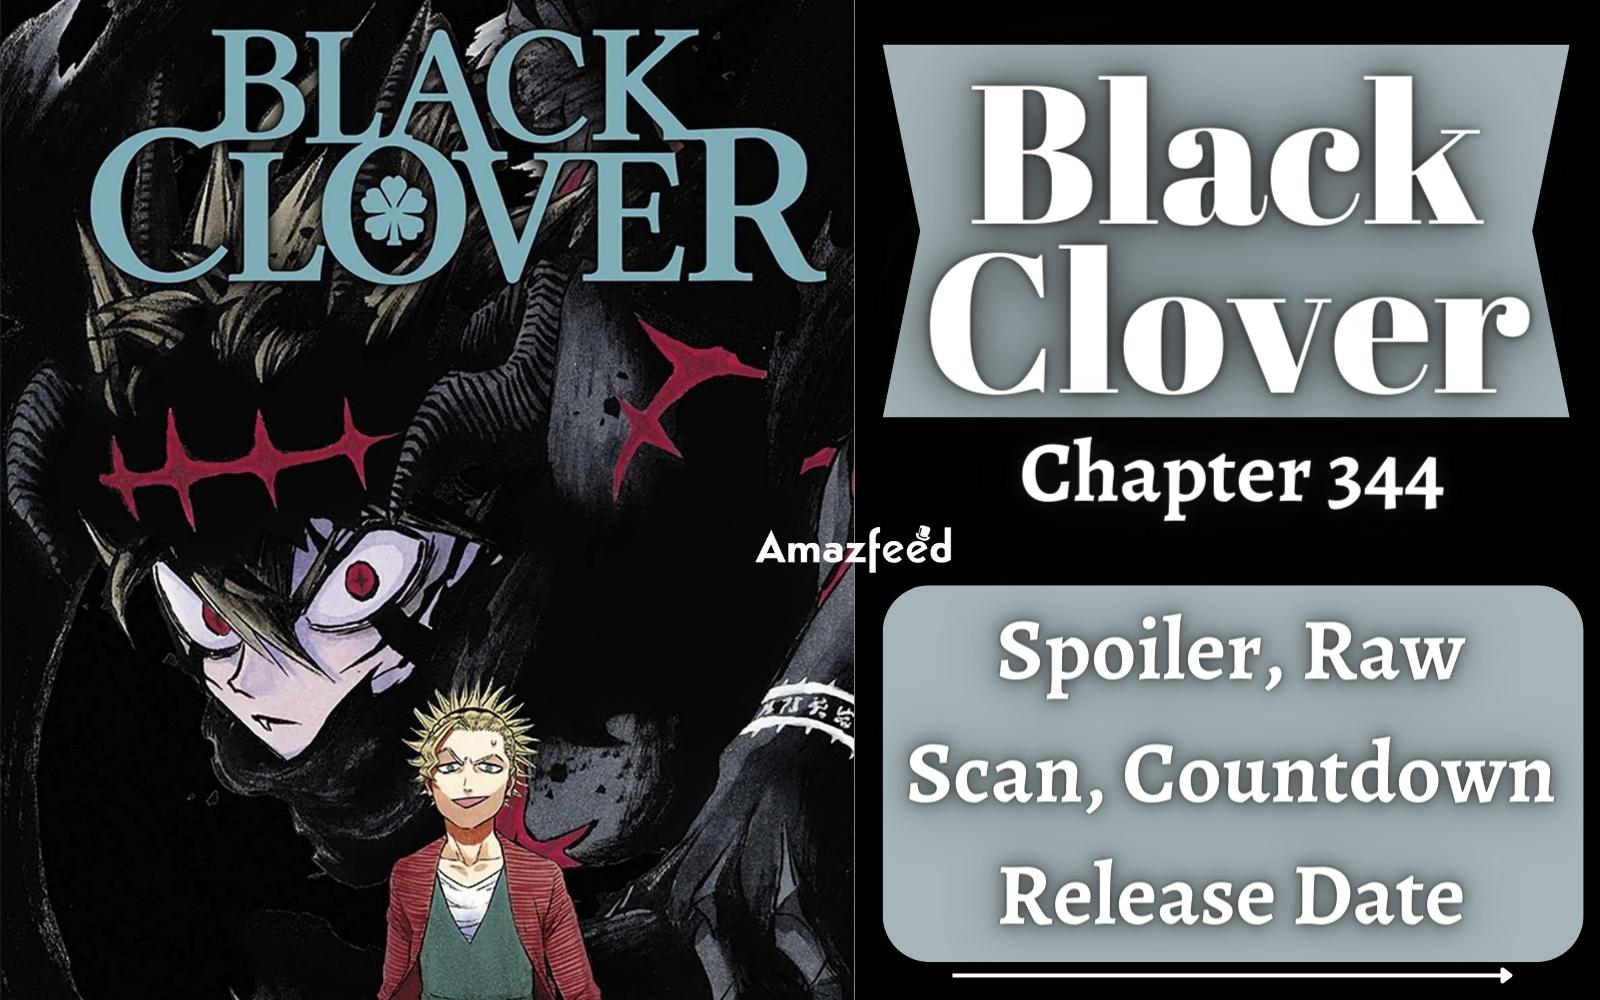 Black Clover Chapter 344 Spoiler, Plot, Raw Scan, Color Page, and Release Date